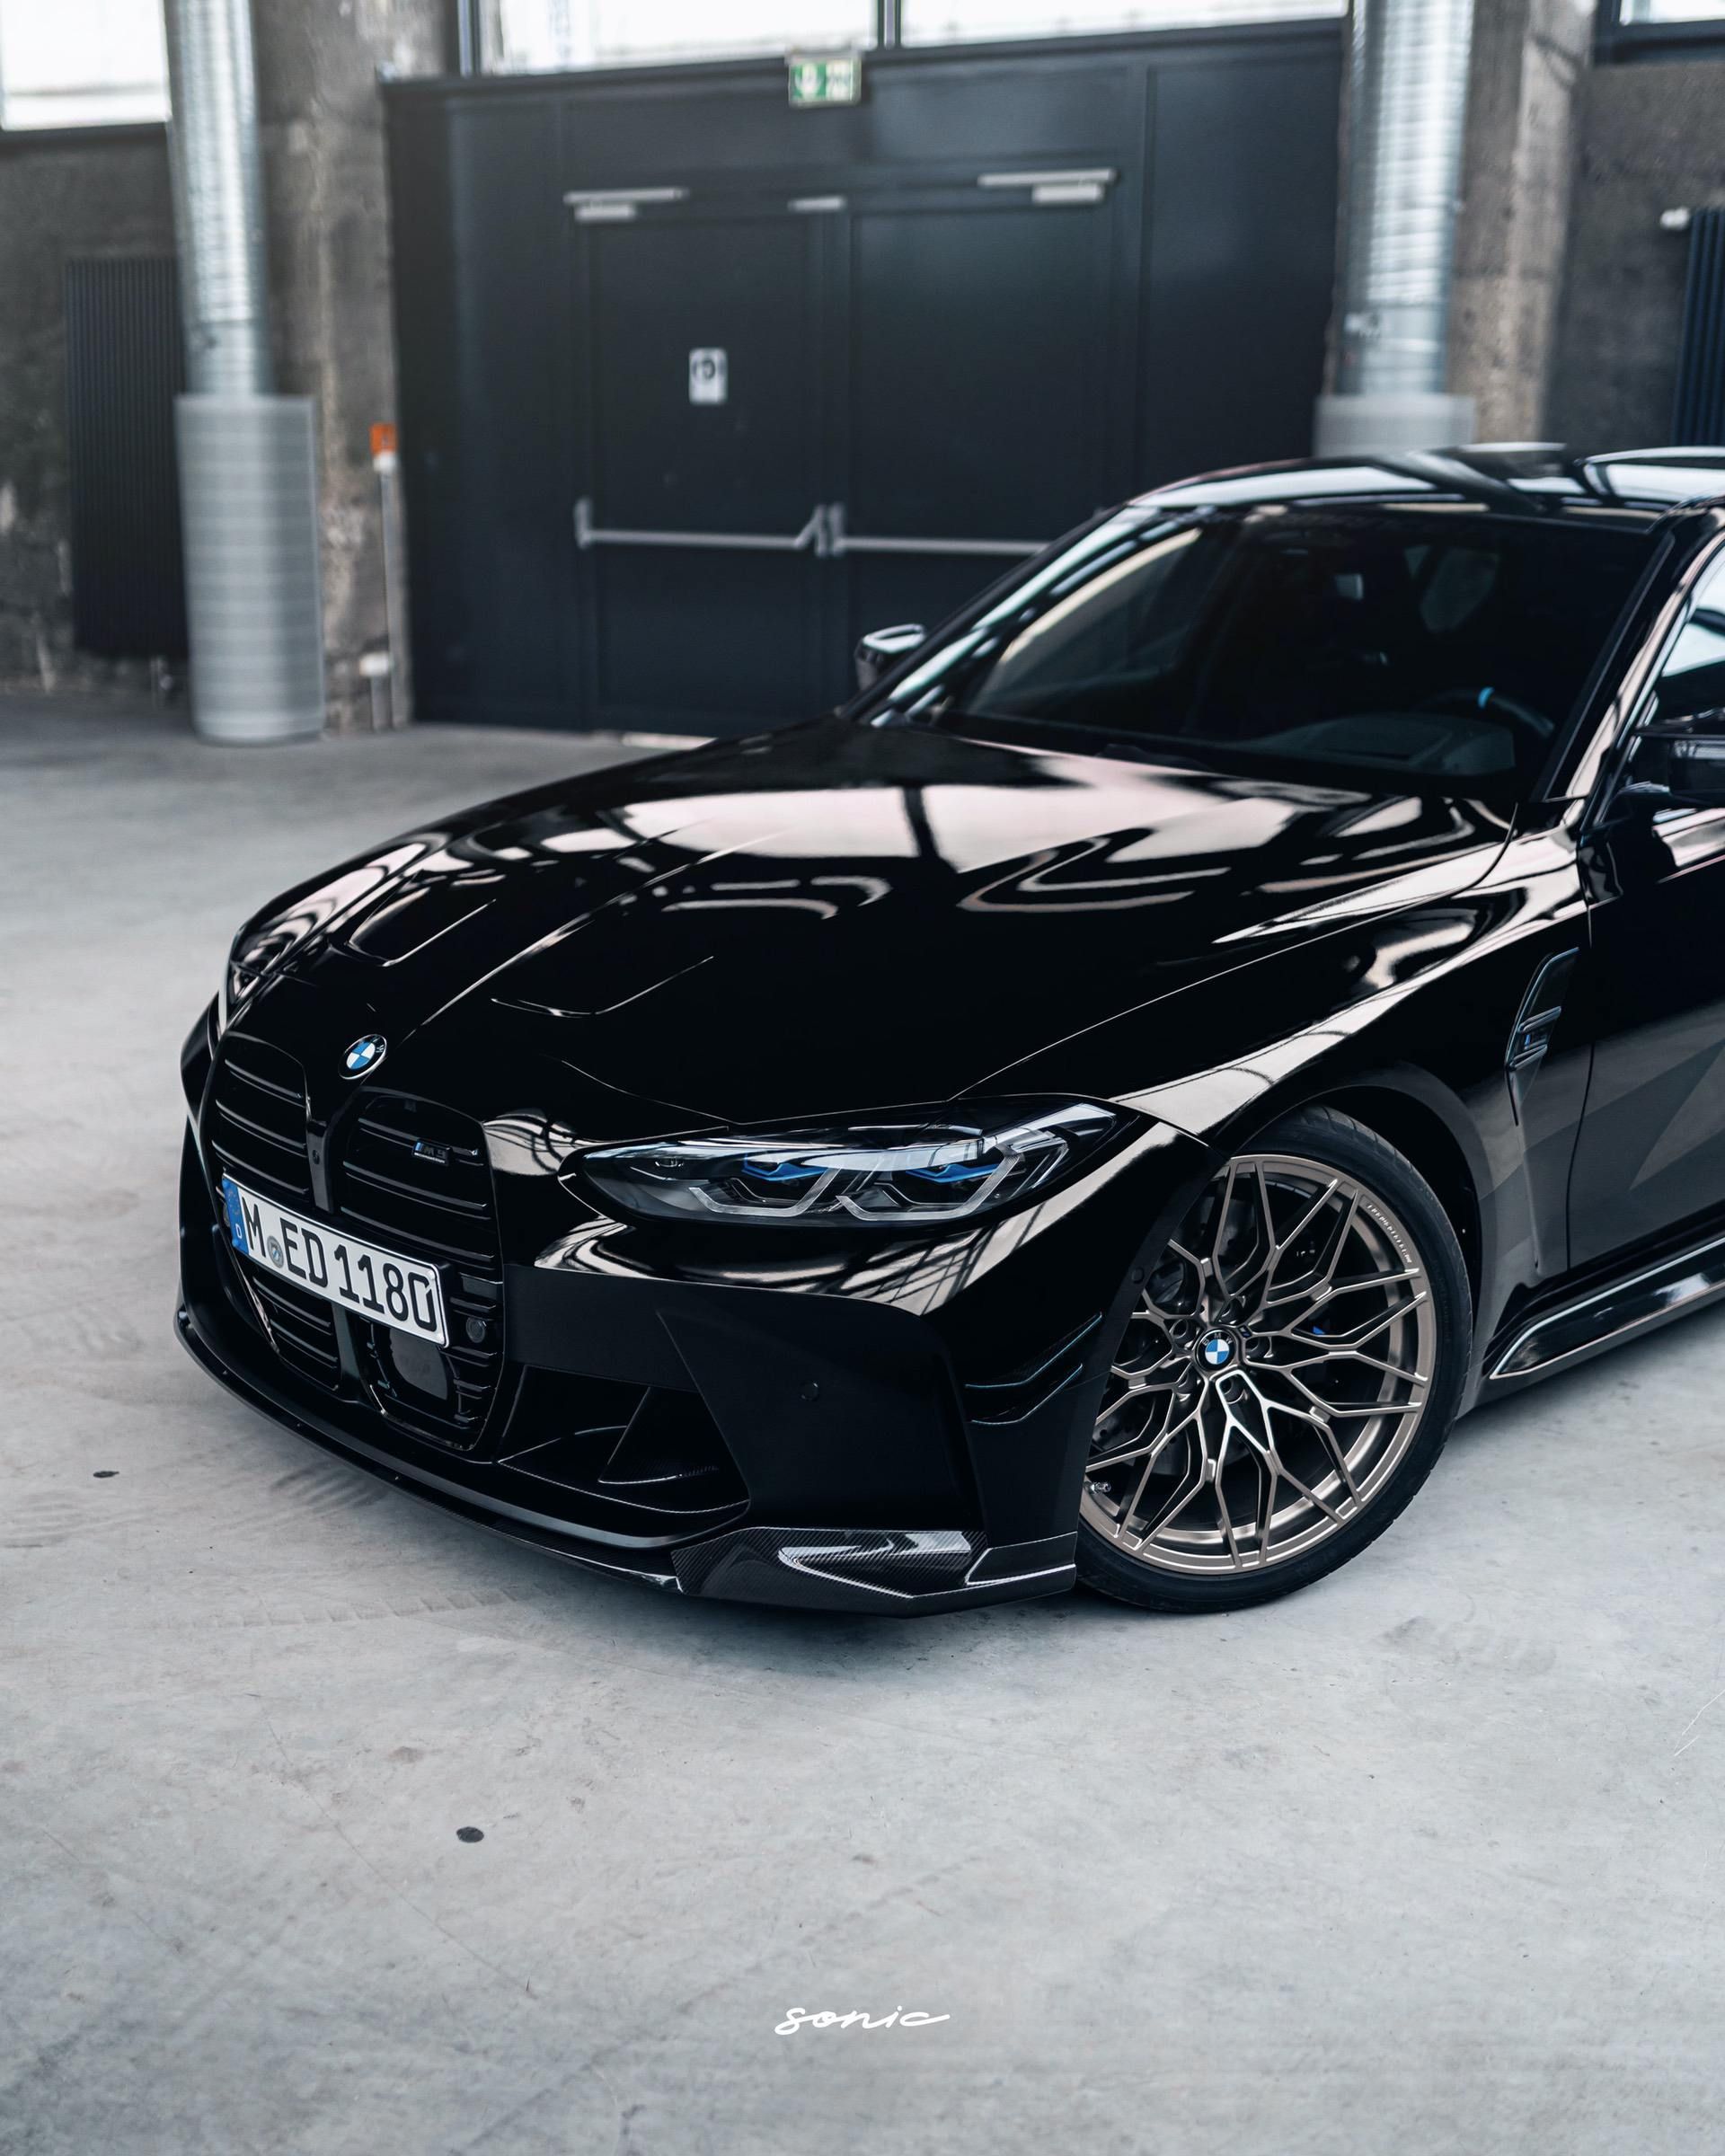 See the G80 BMW M3 with M Performance Parts in Black. Dream cars bmw, Bmw, Bmw m3